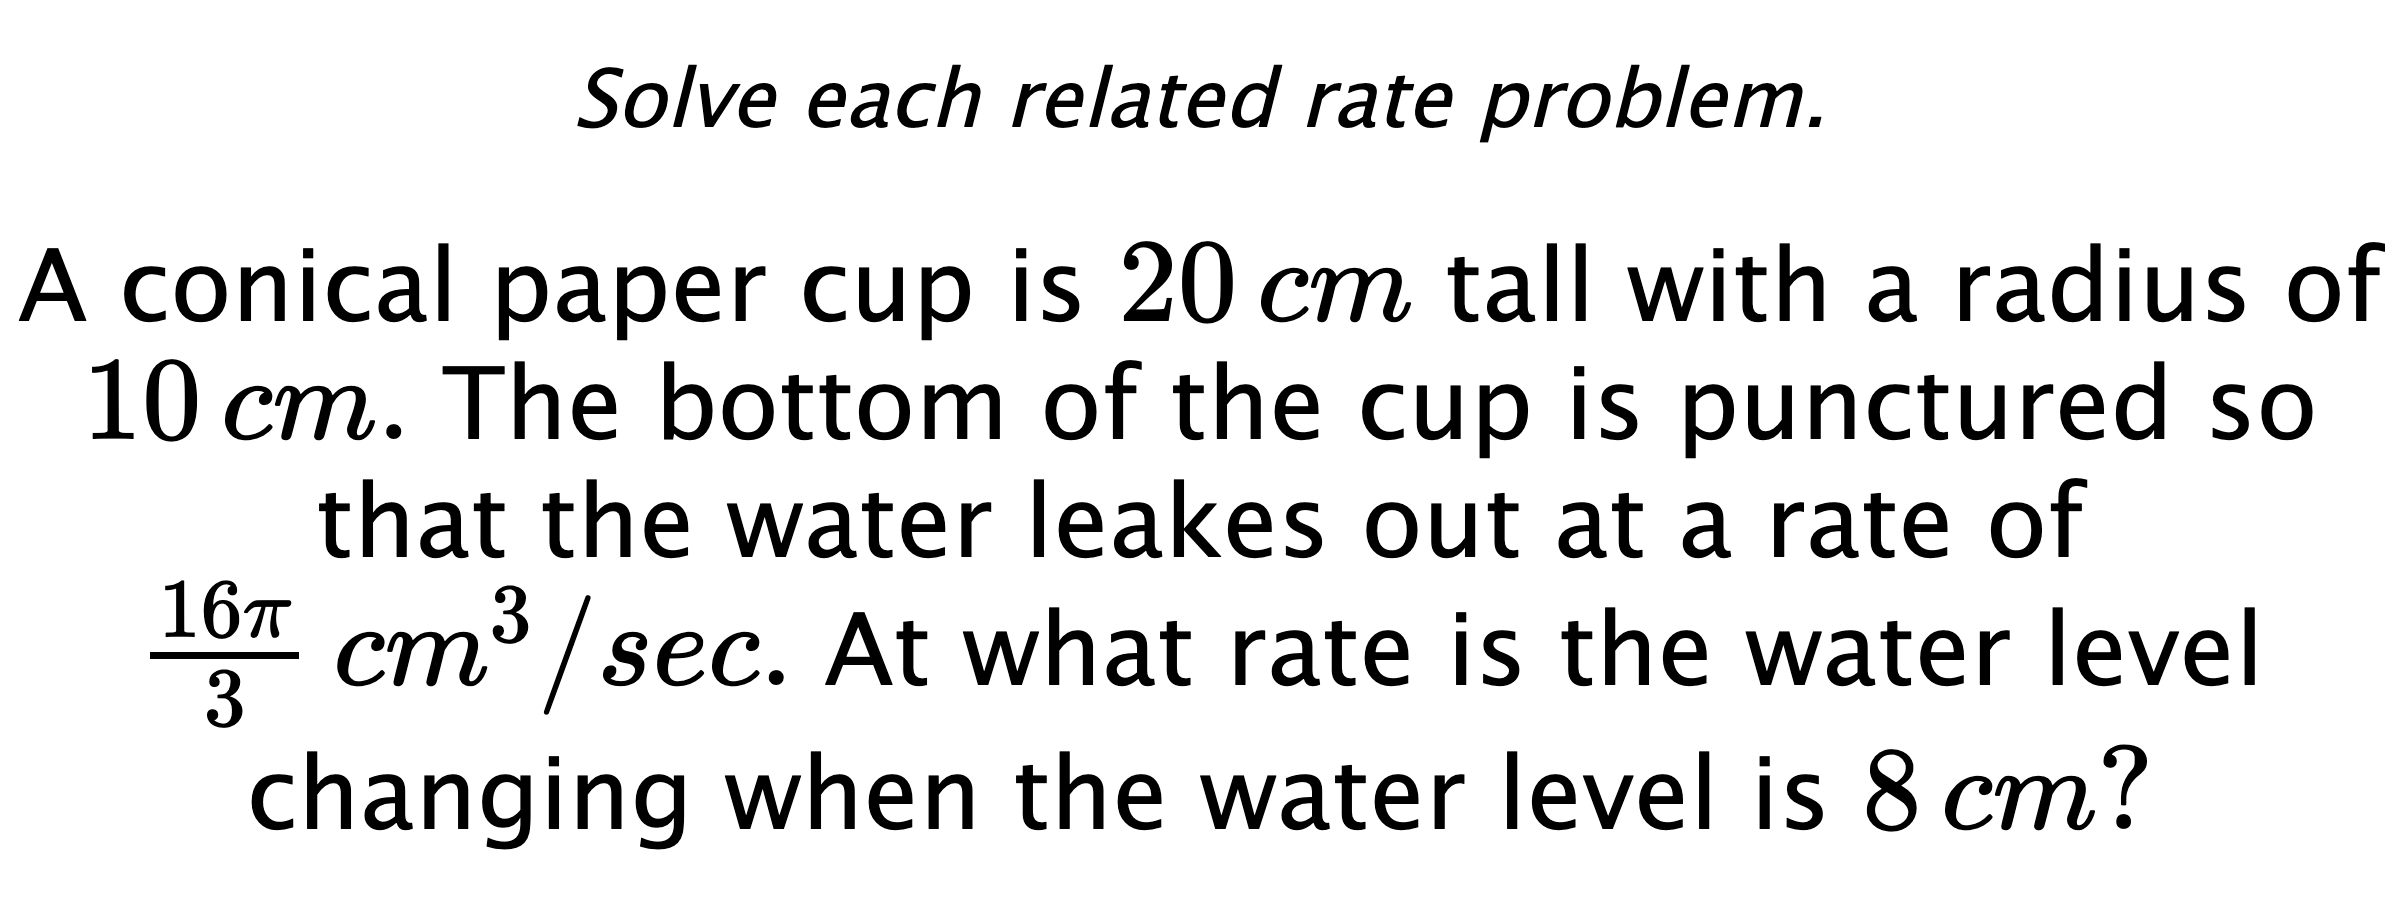 Solve each related rate problem. A conical paper cup is $20\,cm$ tall with a radius of $10\,cm.$ The bottom of the cup is punctured so that the water leakes out at a rate of $\frac{16\pi}{3} \,cm^{3}/sec.$ At what rate is the water level changing when the water level is $8\,cm?$